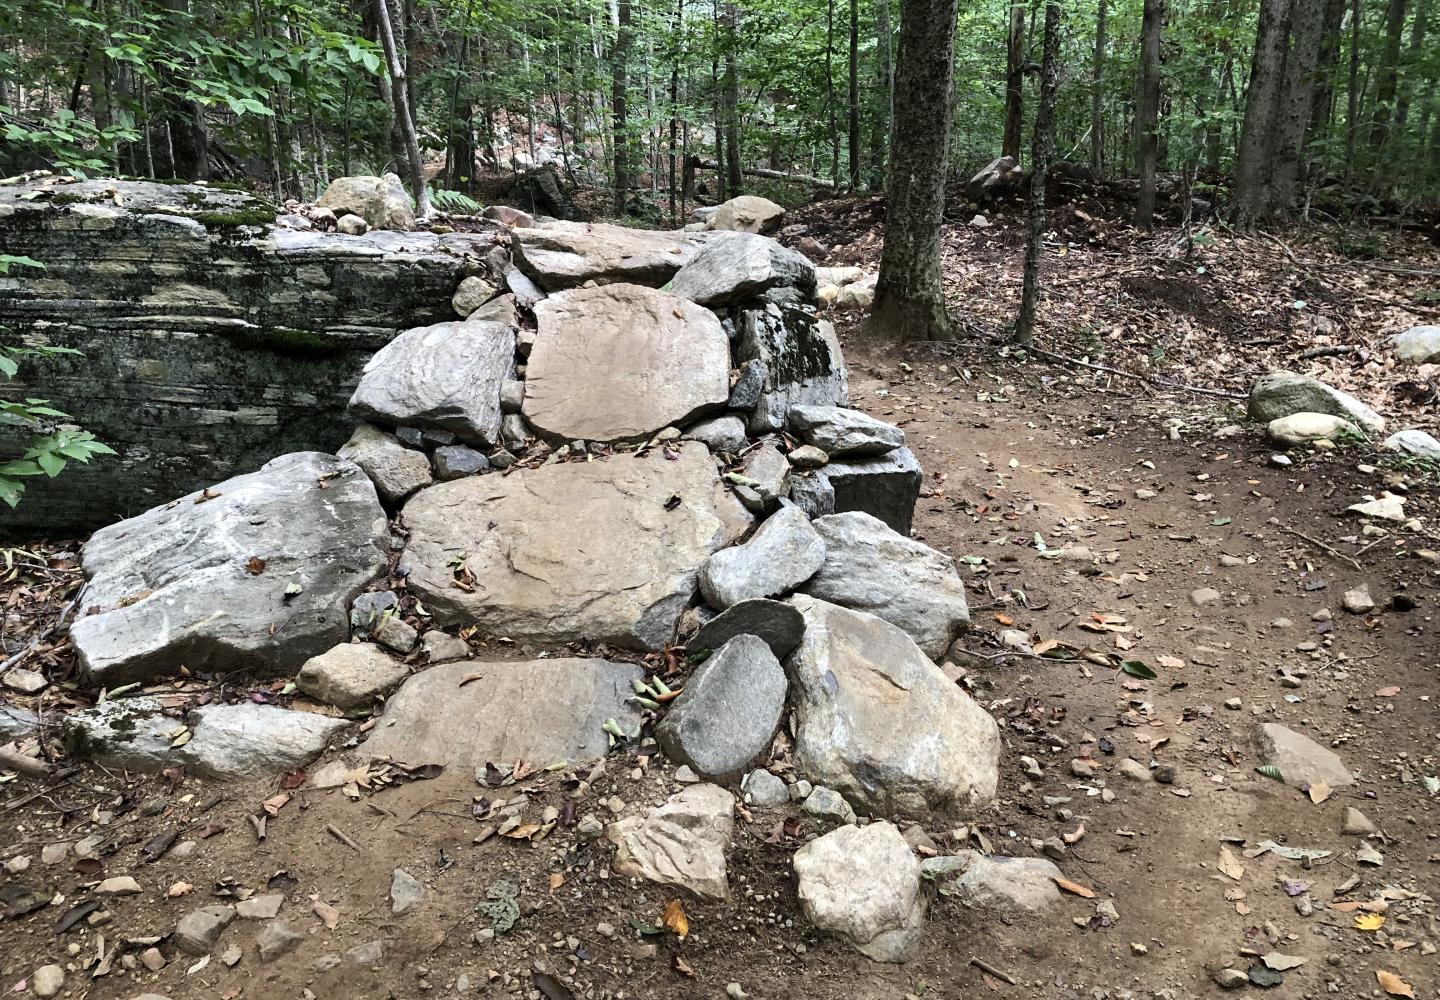 This stone jump is an example of the creative rock work found on the Wheelerville Trails. 